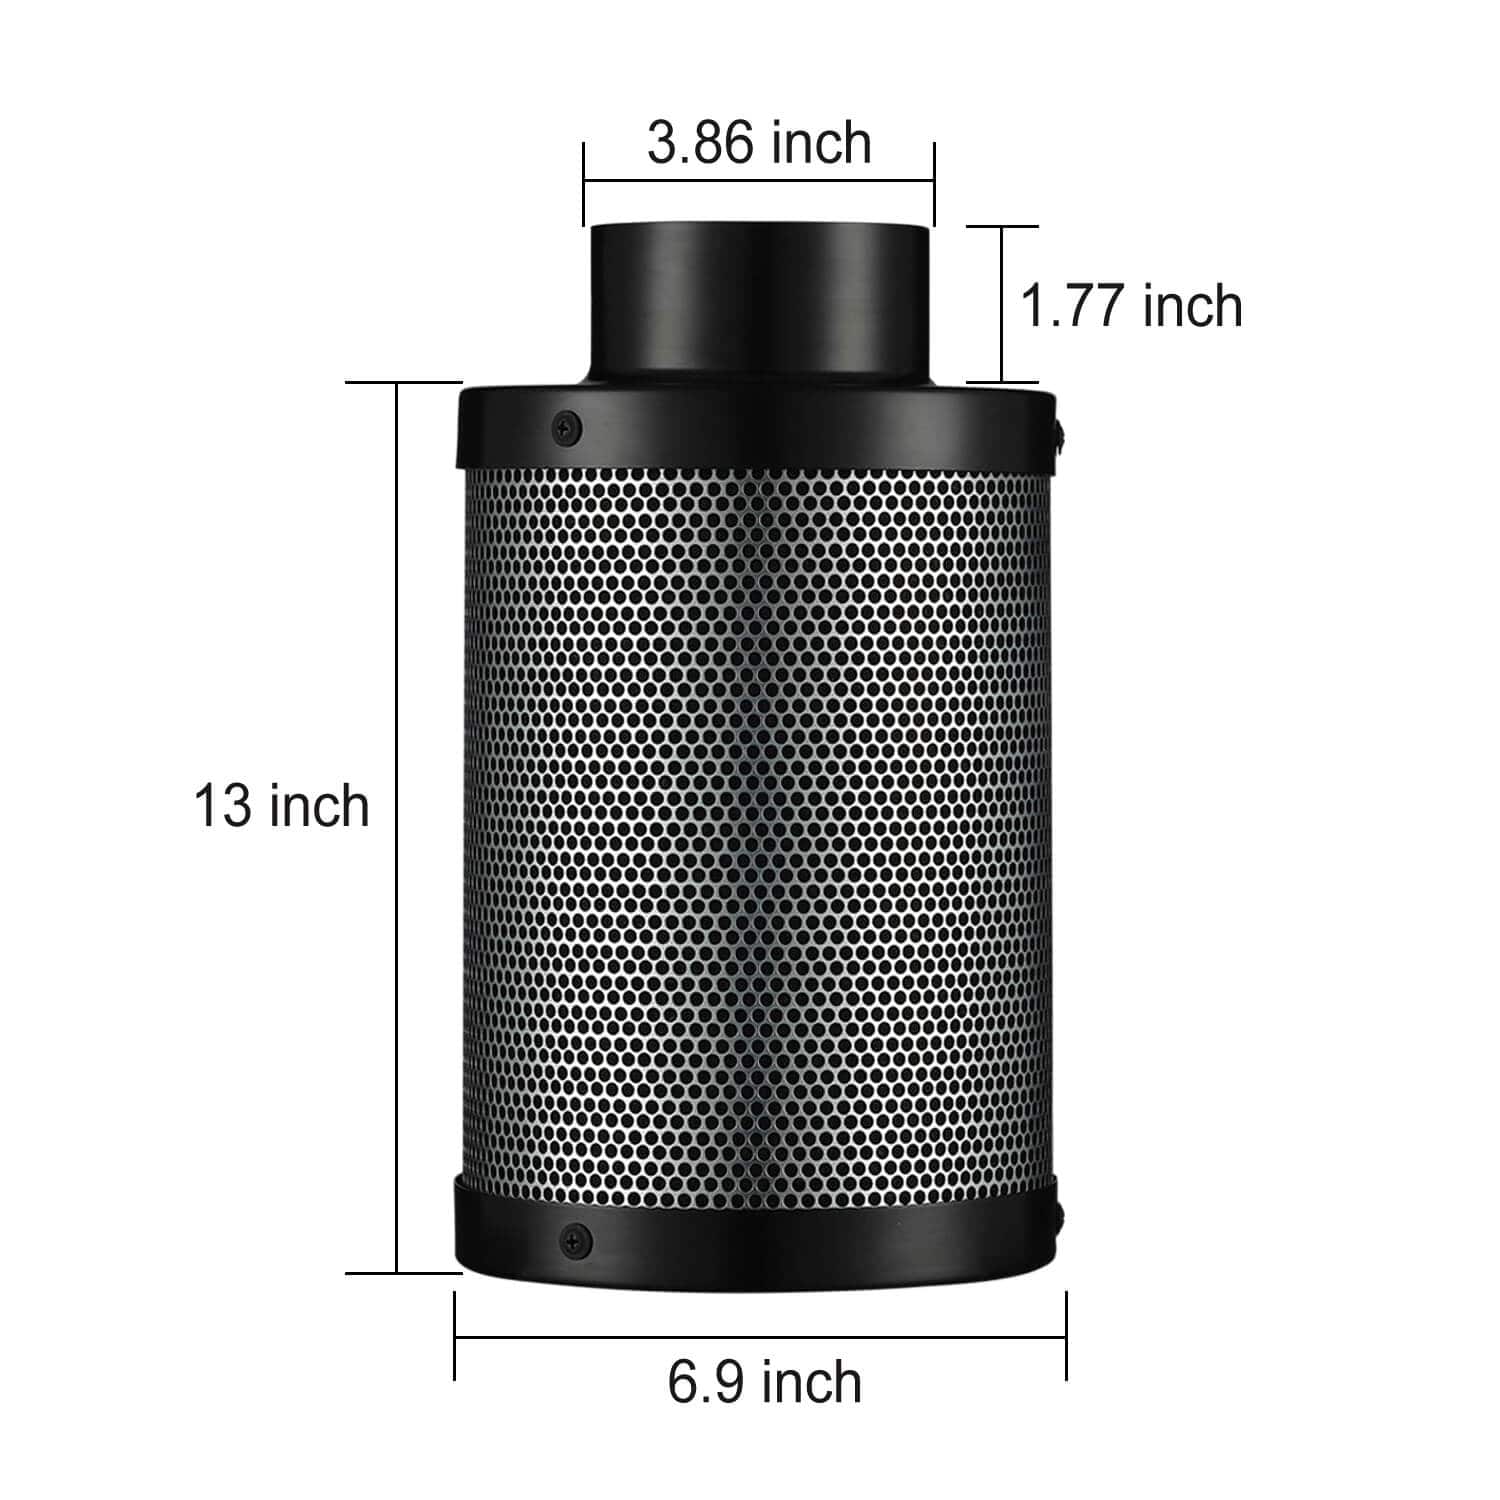 Adjustable Activated Carbon Filter